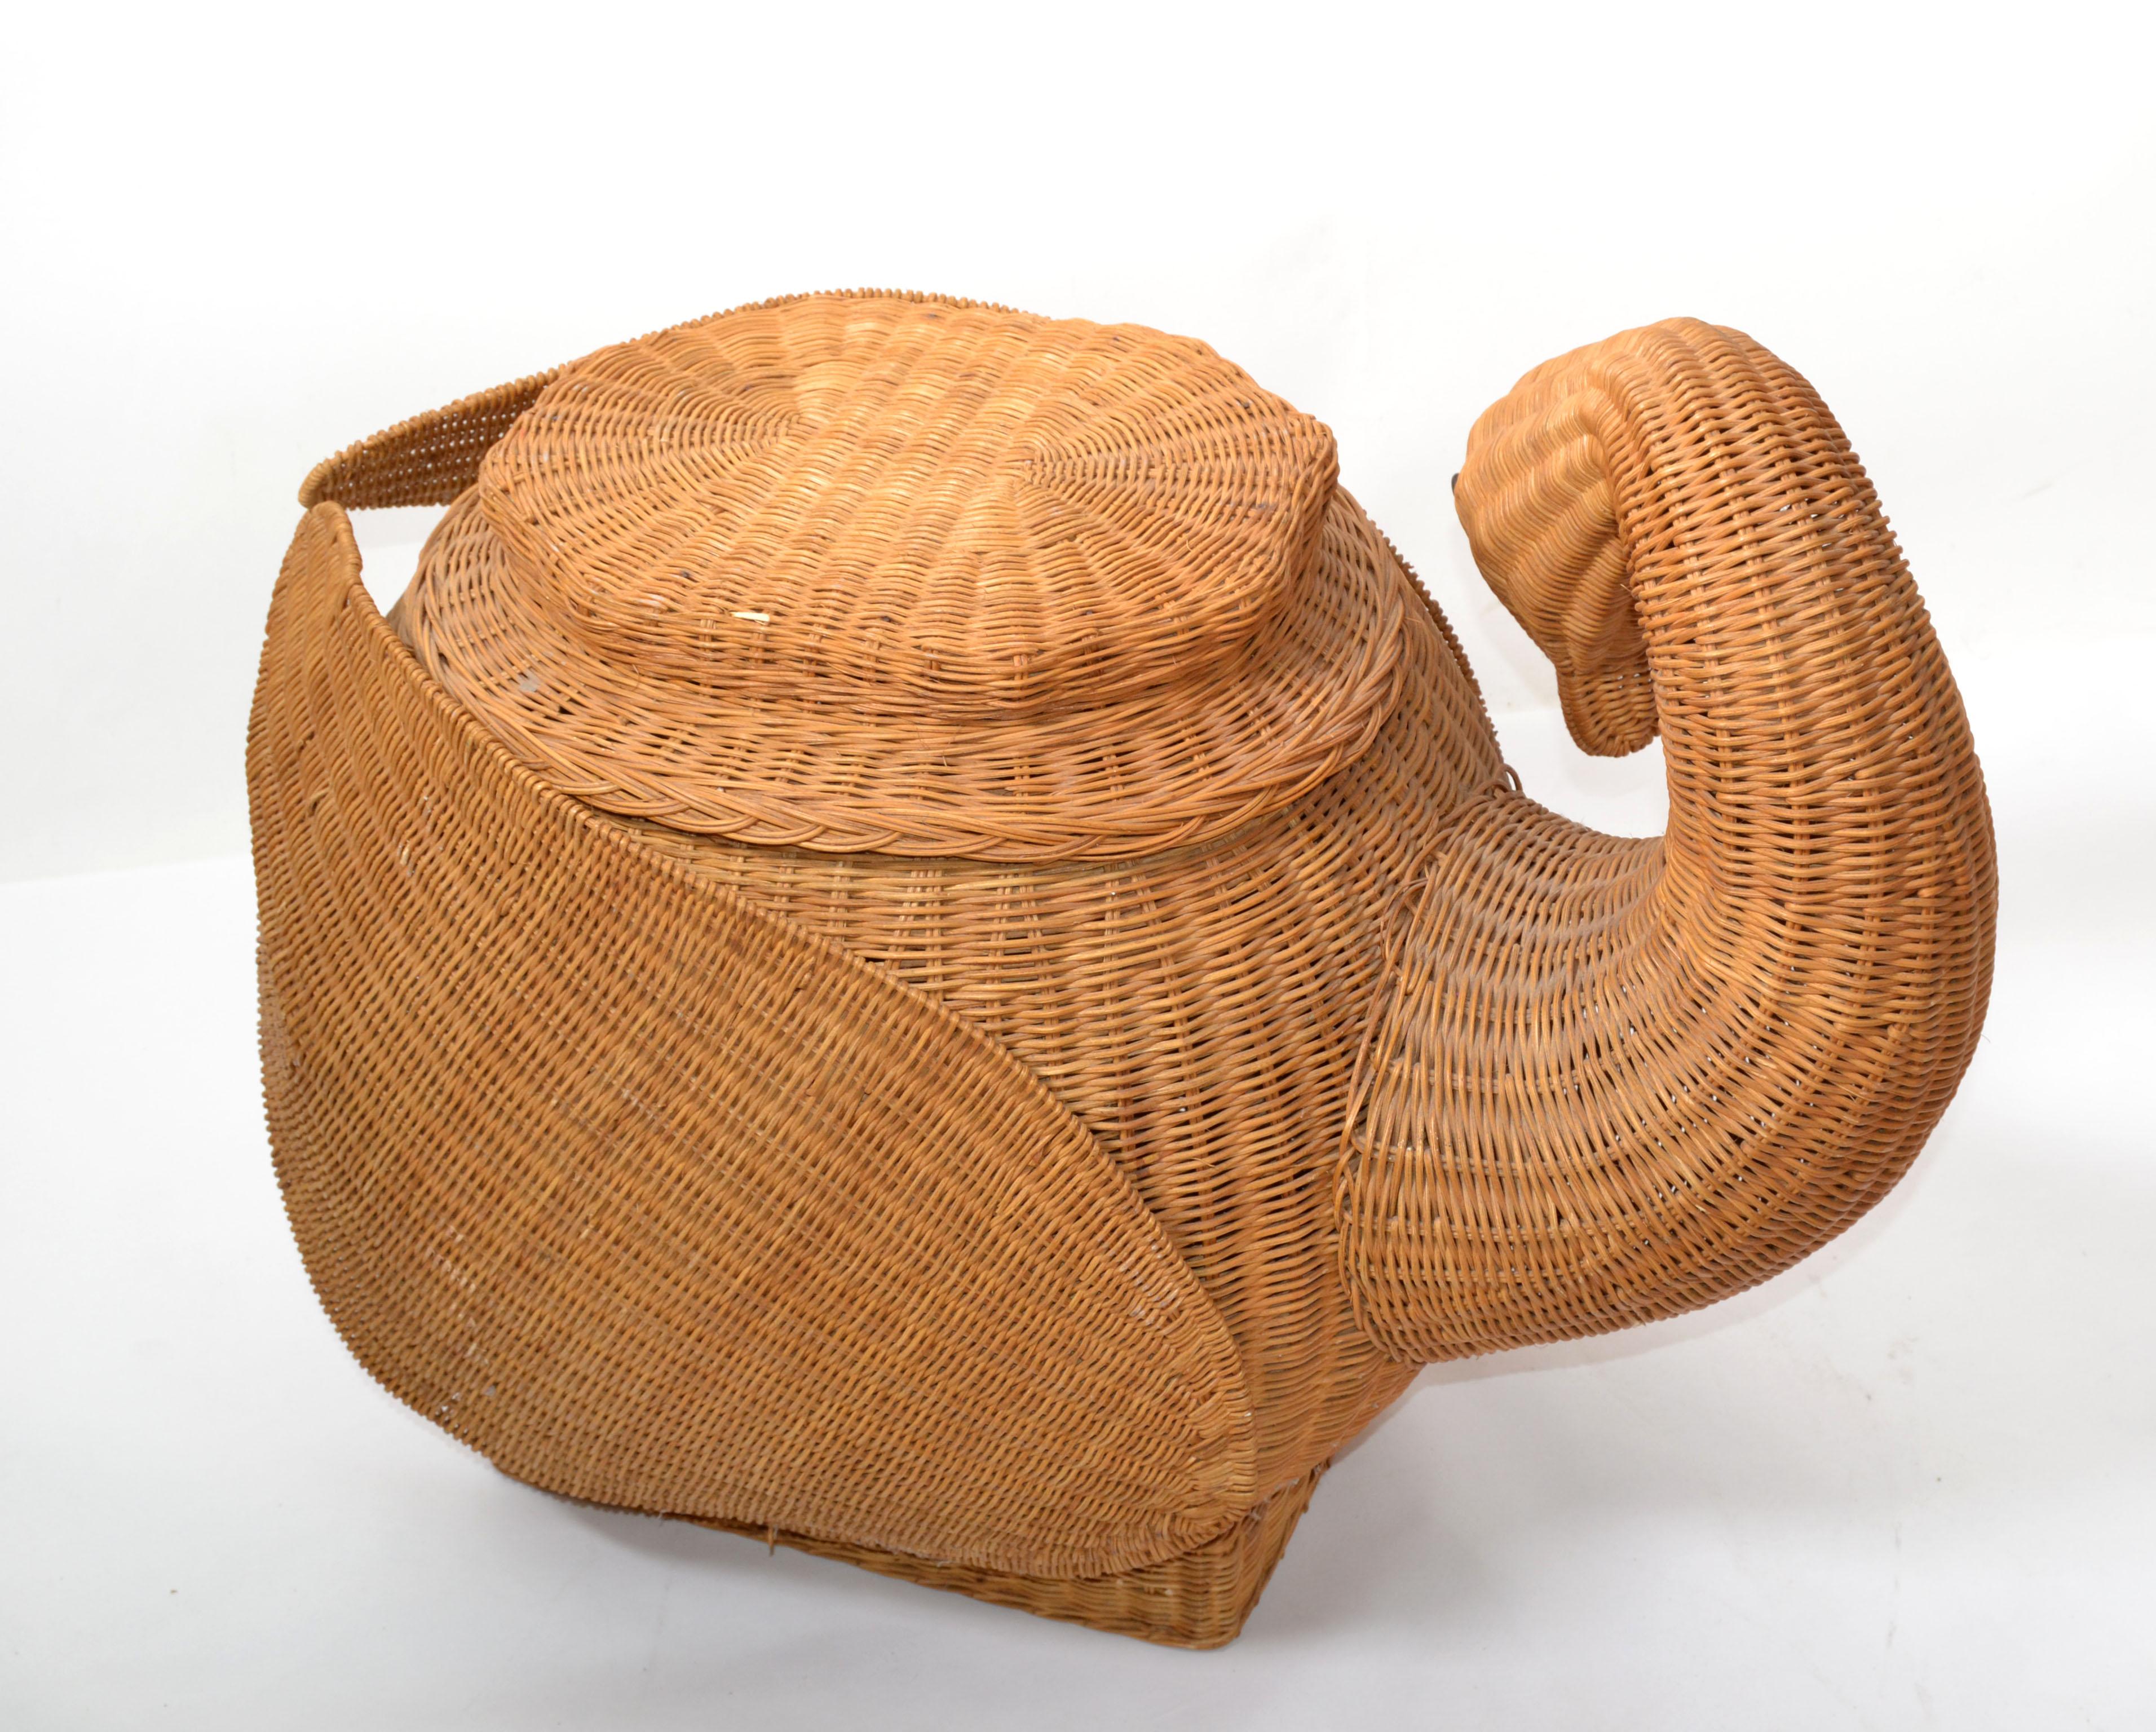 Sculptural Hand-Woven Rattan Swan Coffee or Cocktail Table Round Glass Top 1970 For Sale 1